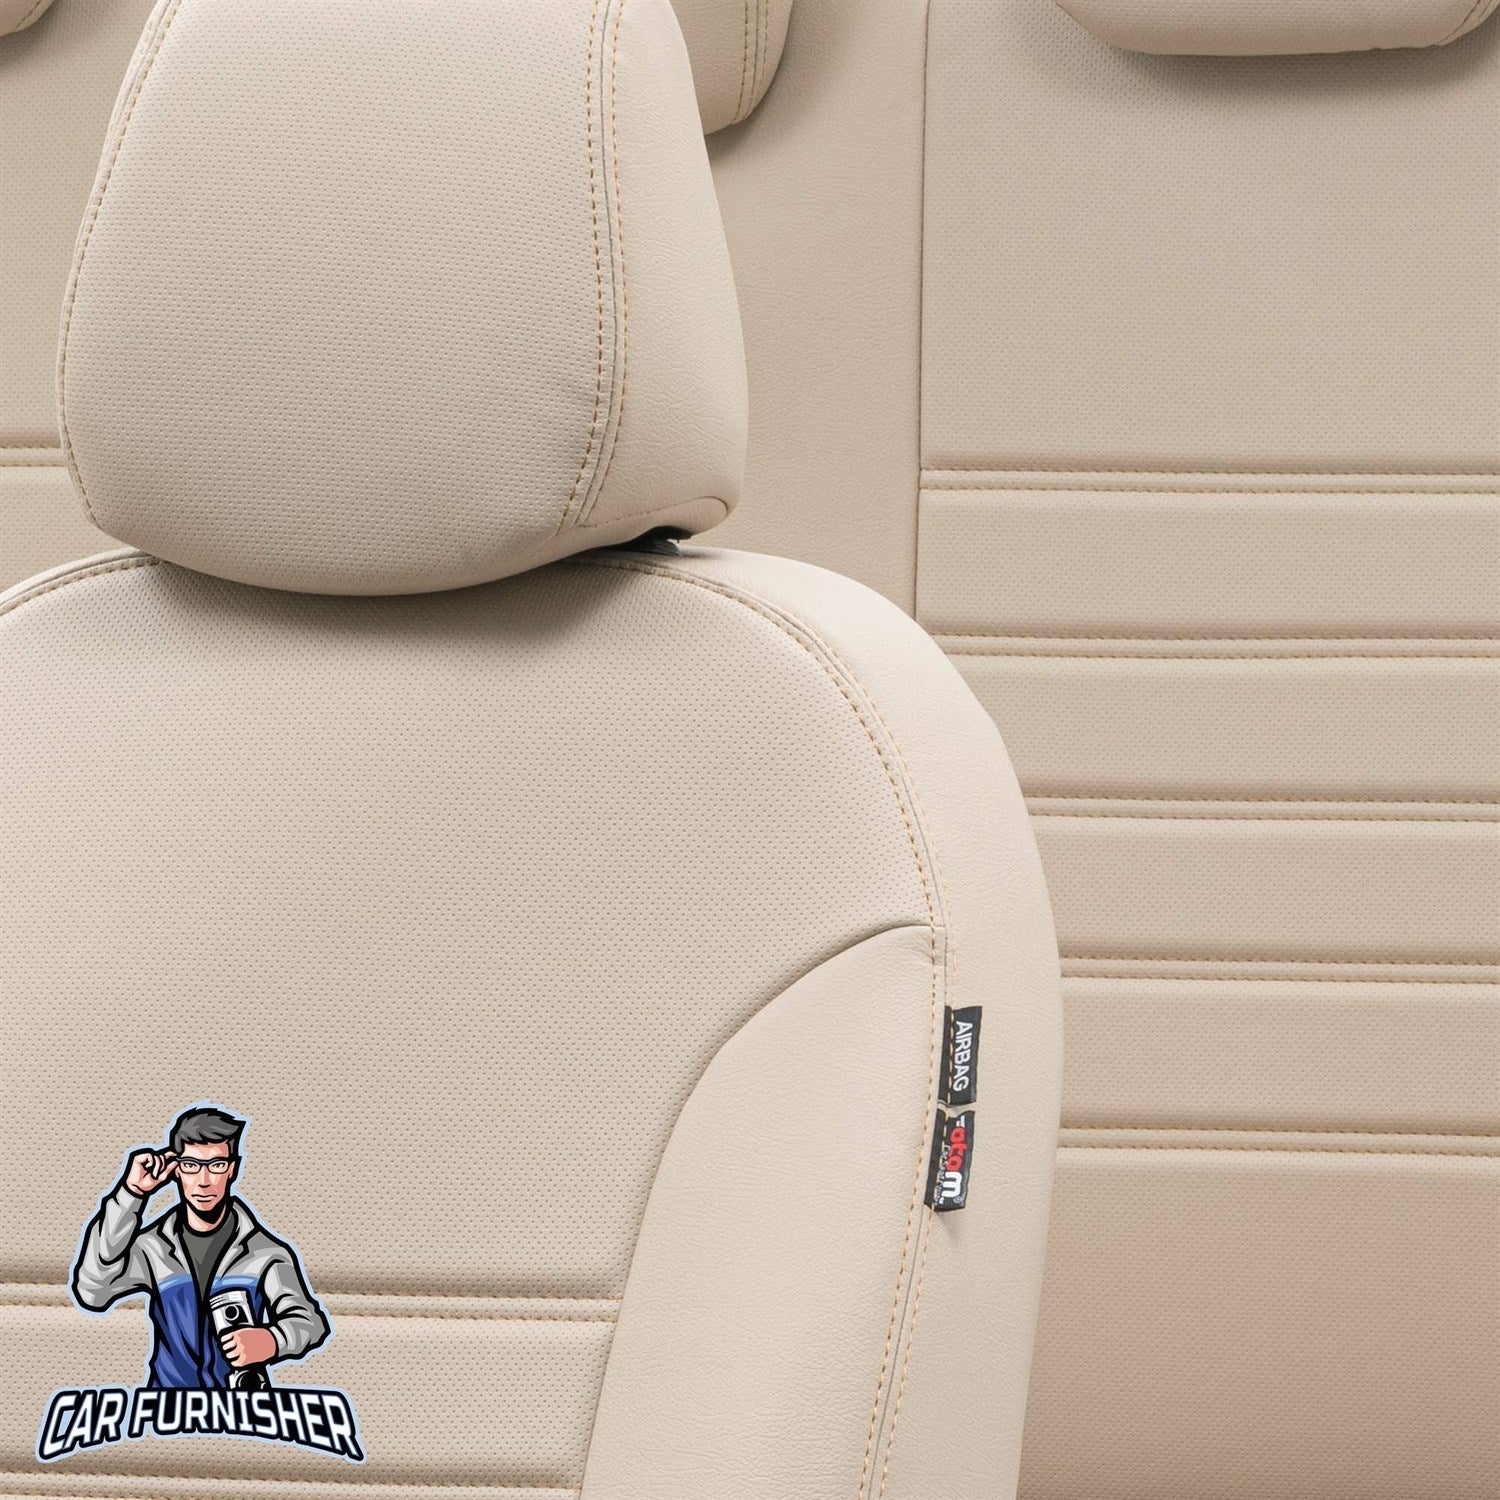 Opel Insignia Seat Covers Istanbul Leather Design Beige Leather